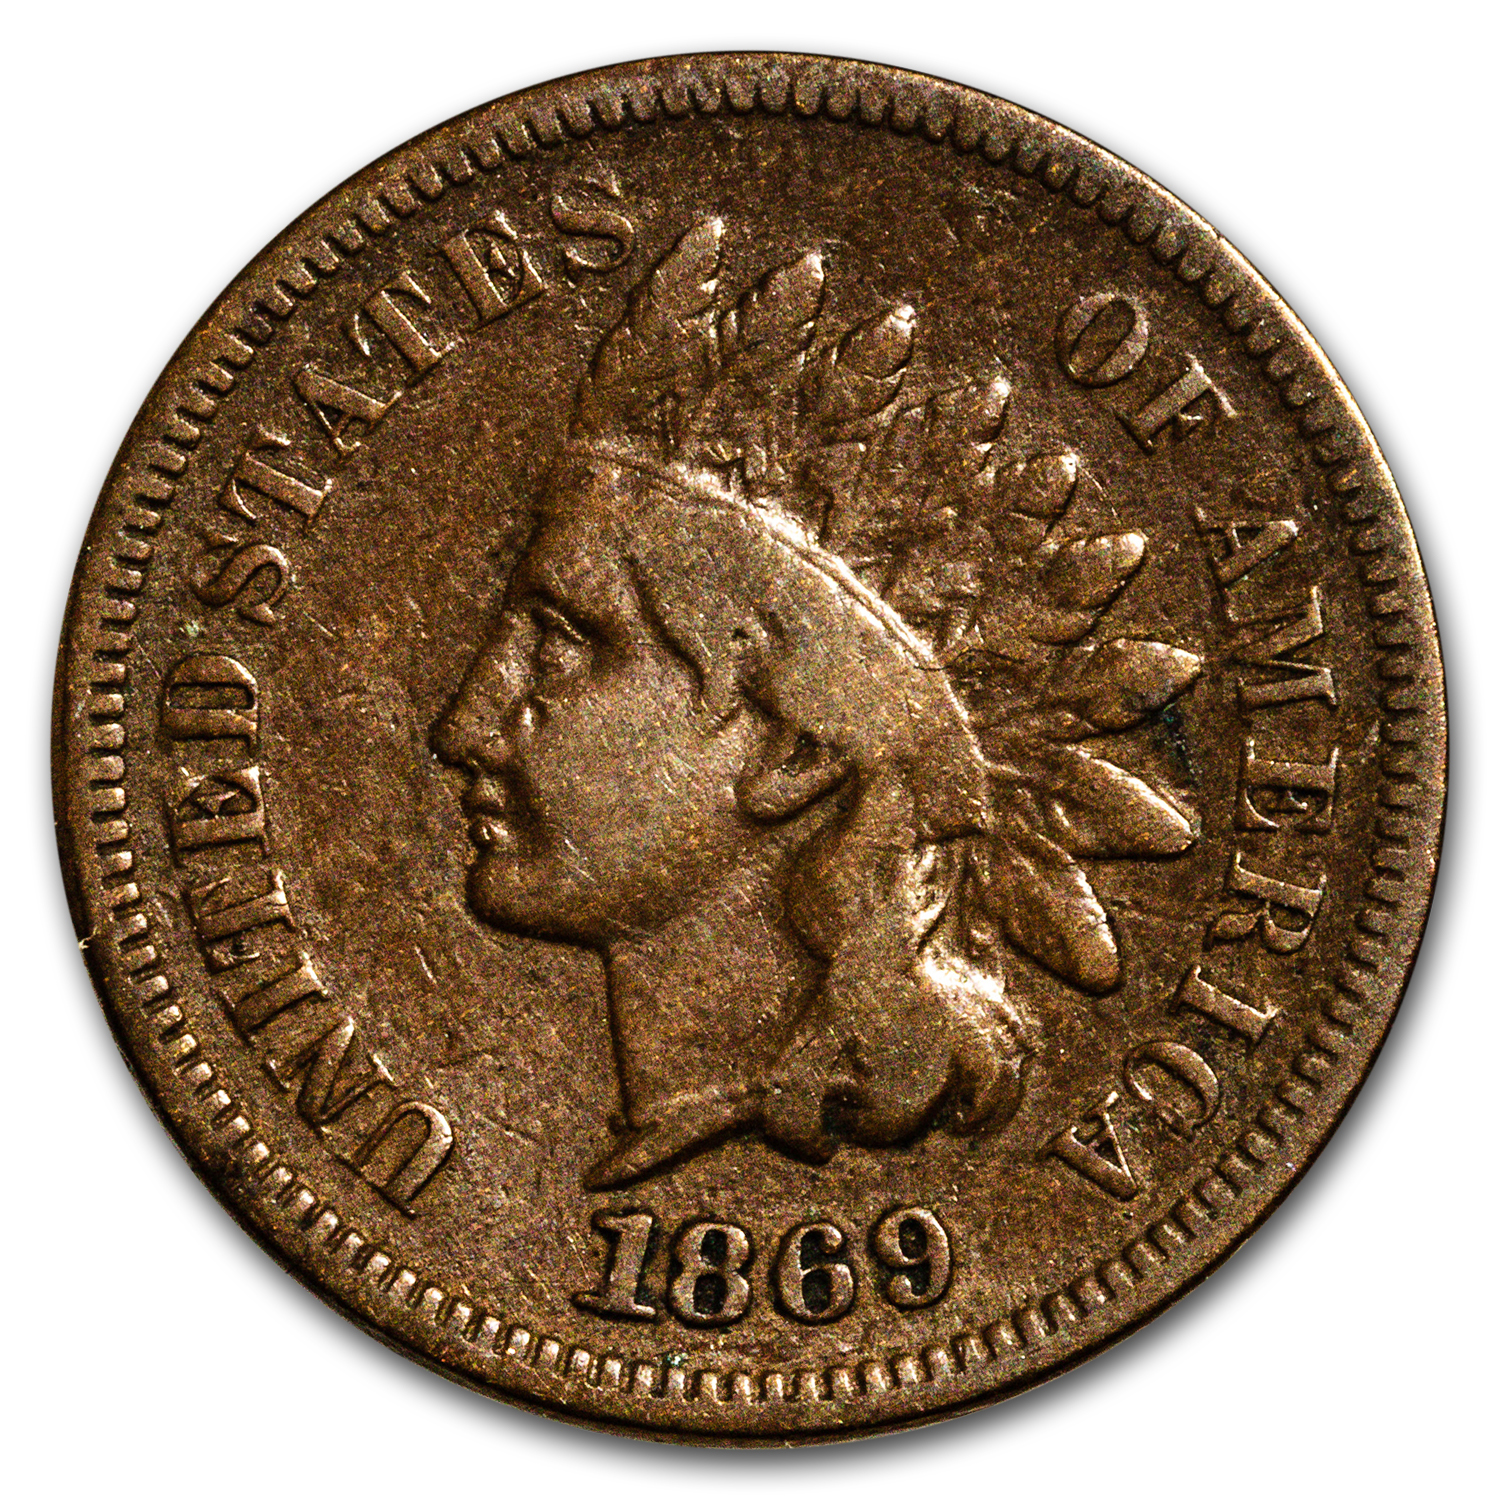 Buy 1869 Indian Head Cent VG